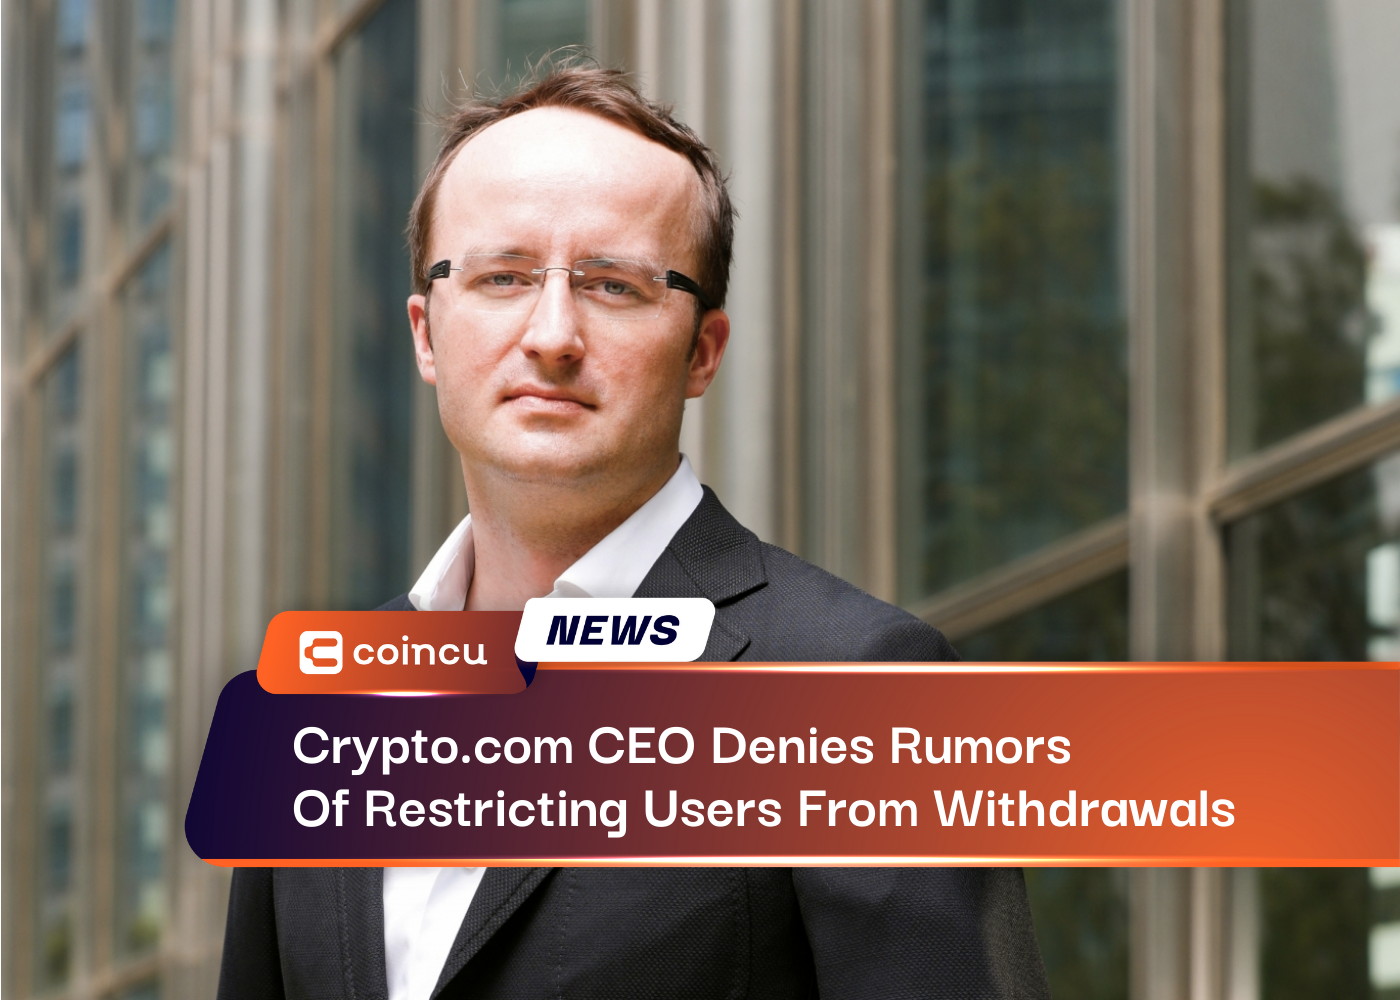 Crypto.com CEO Denies Rumors Of Restricting Users From Withdrawals